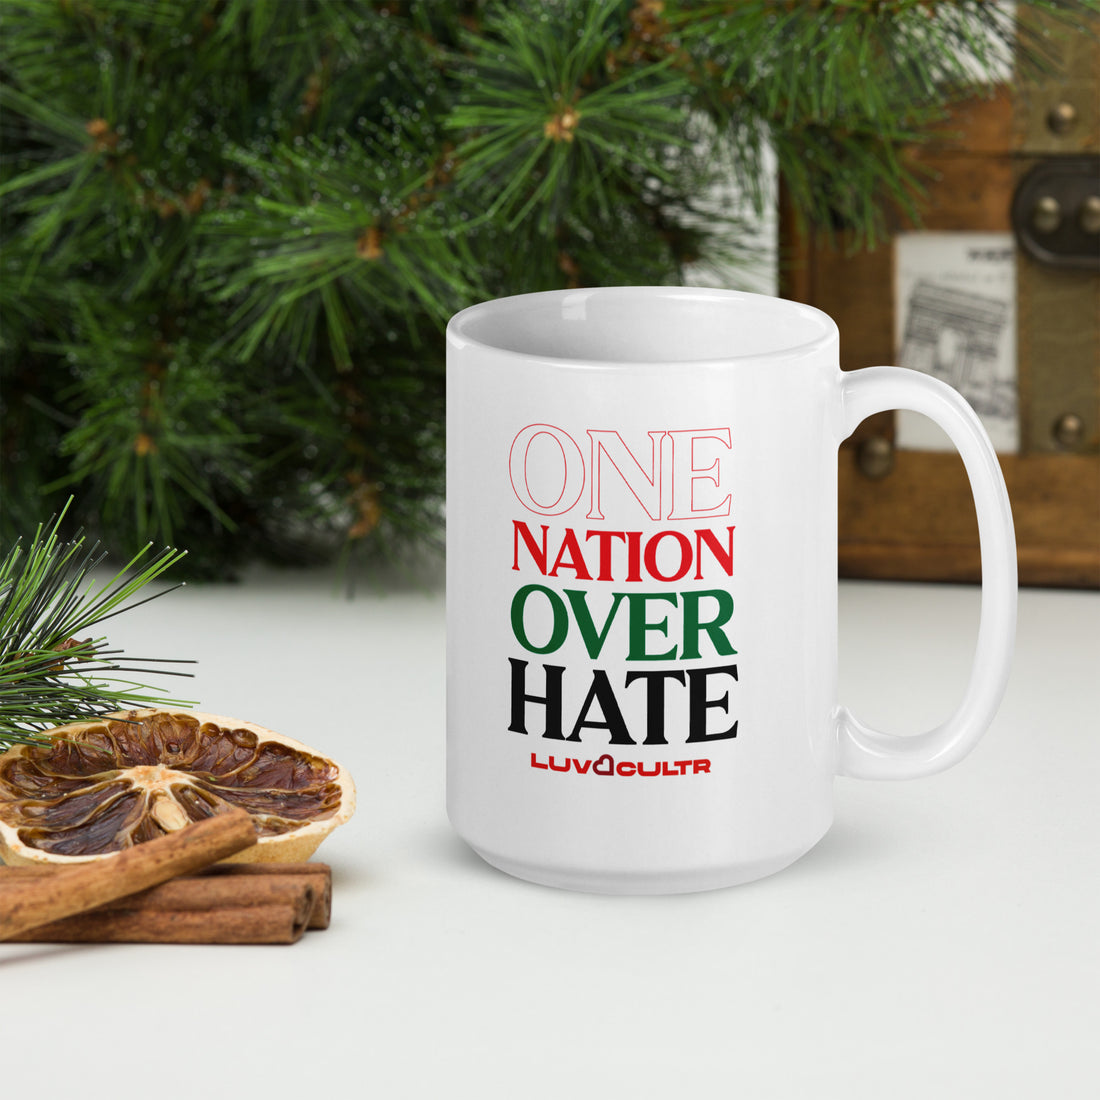 One Nation Over Hate